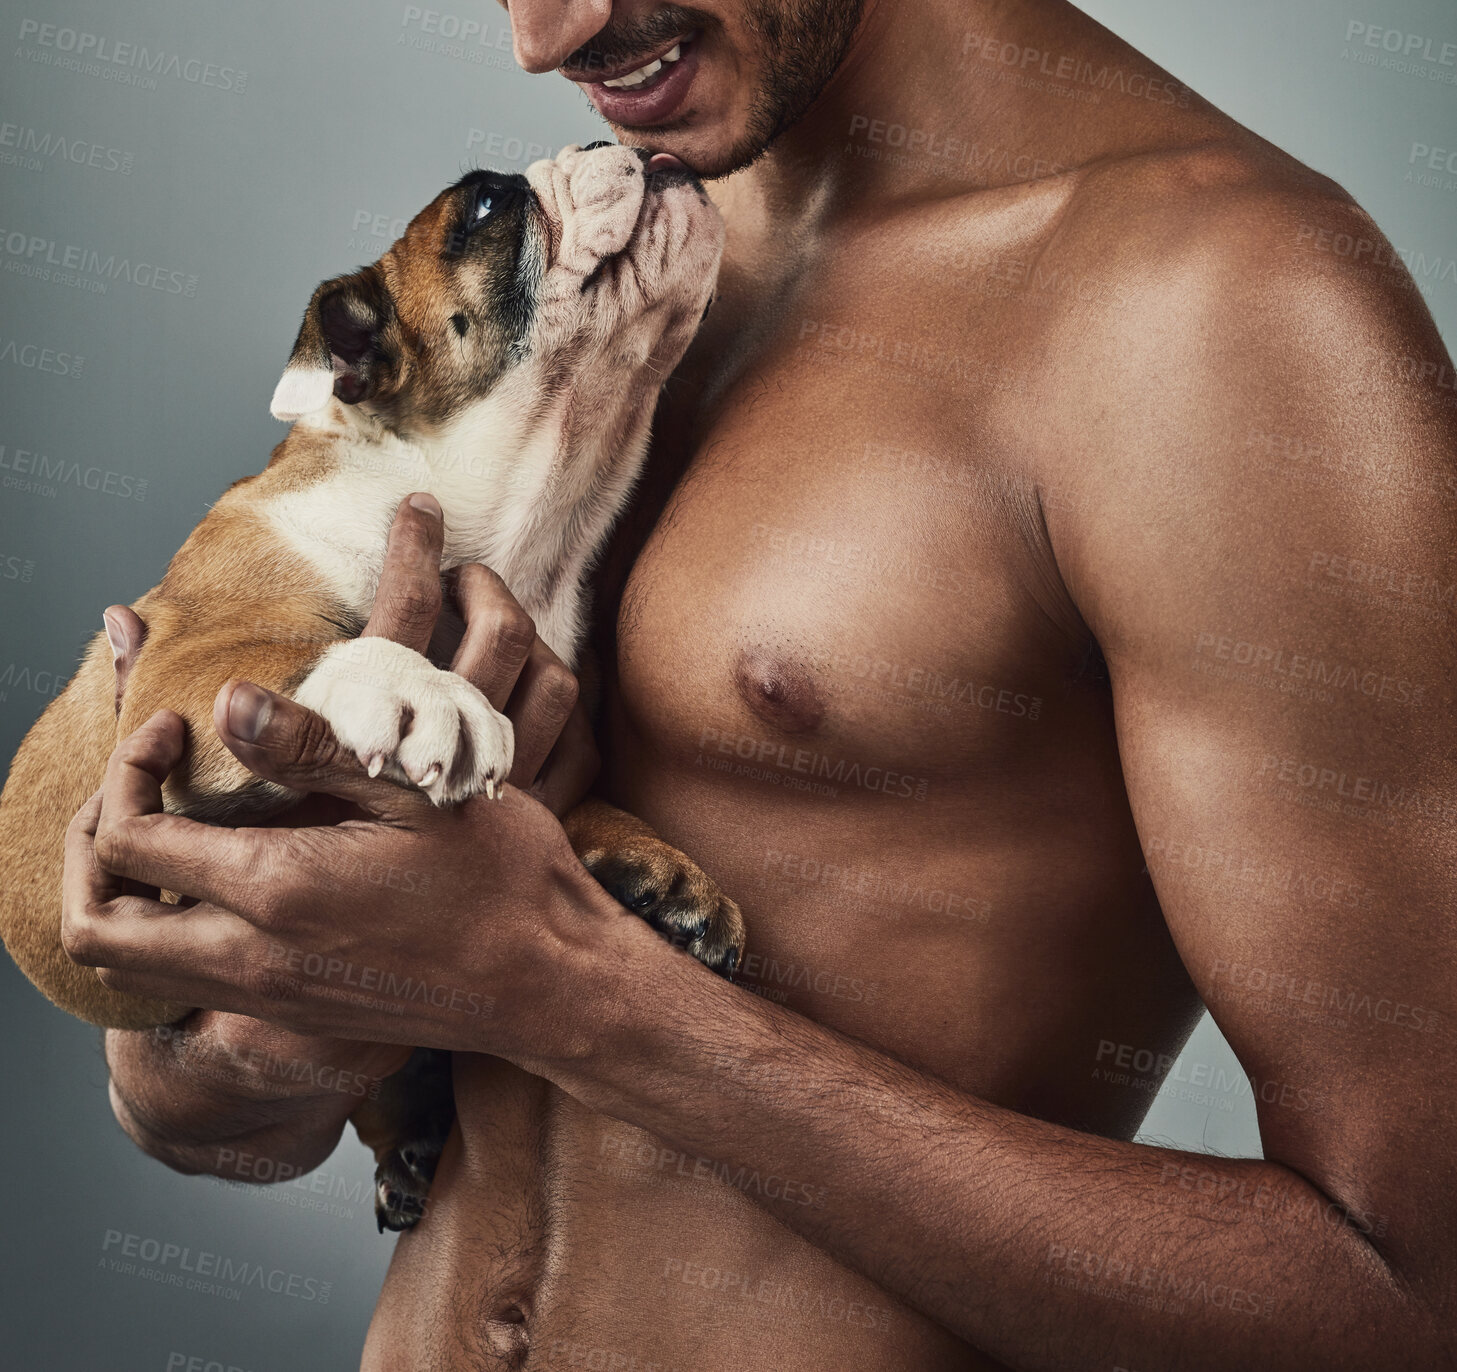 Buy stock photo Studio shot of a handsome and shirtless young man holding a bulldog puppy against a grey background